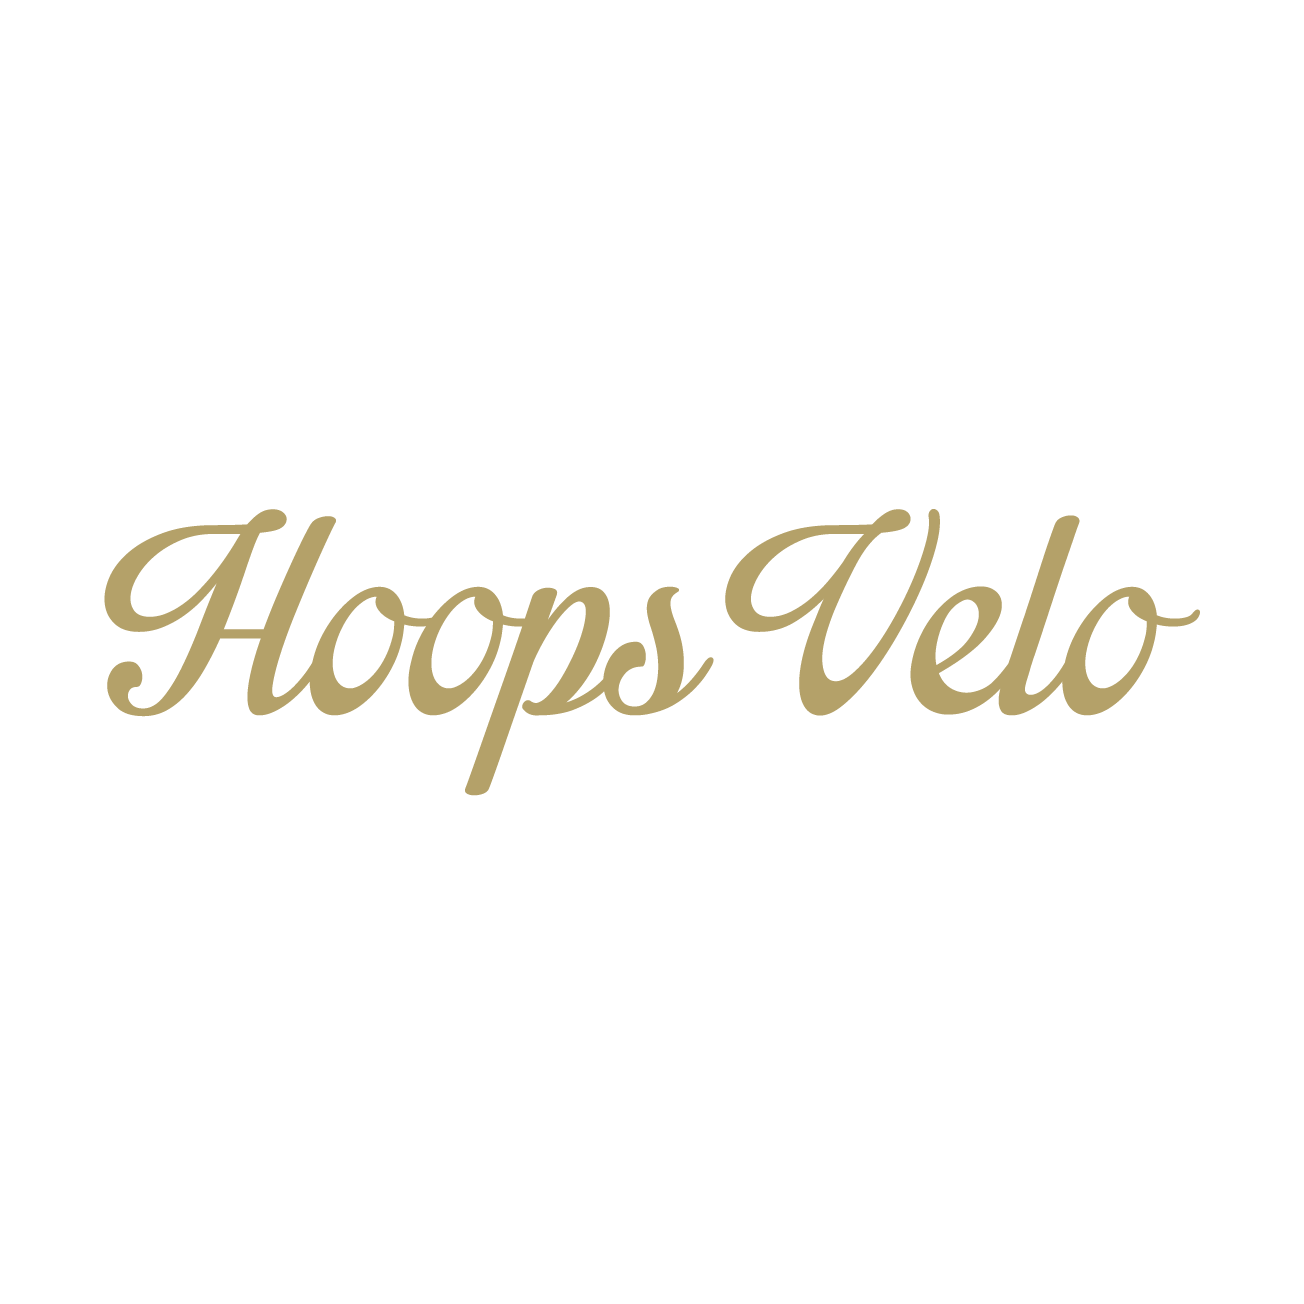 Club Image for HOOPS VELO